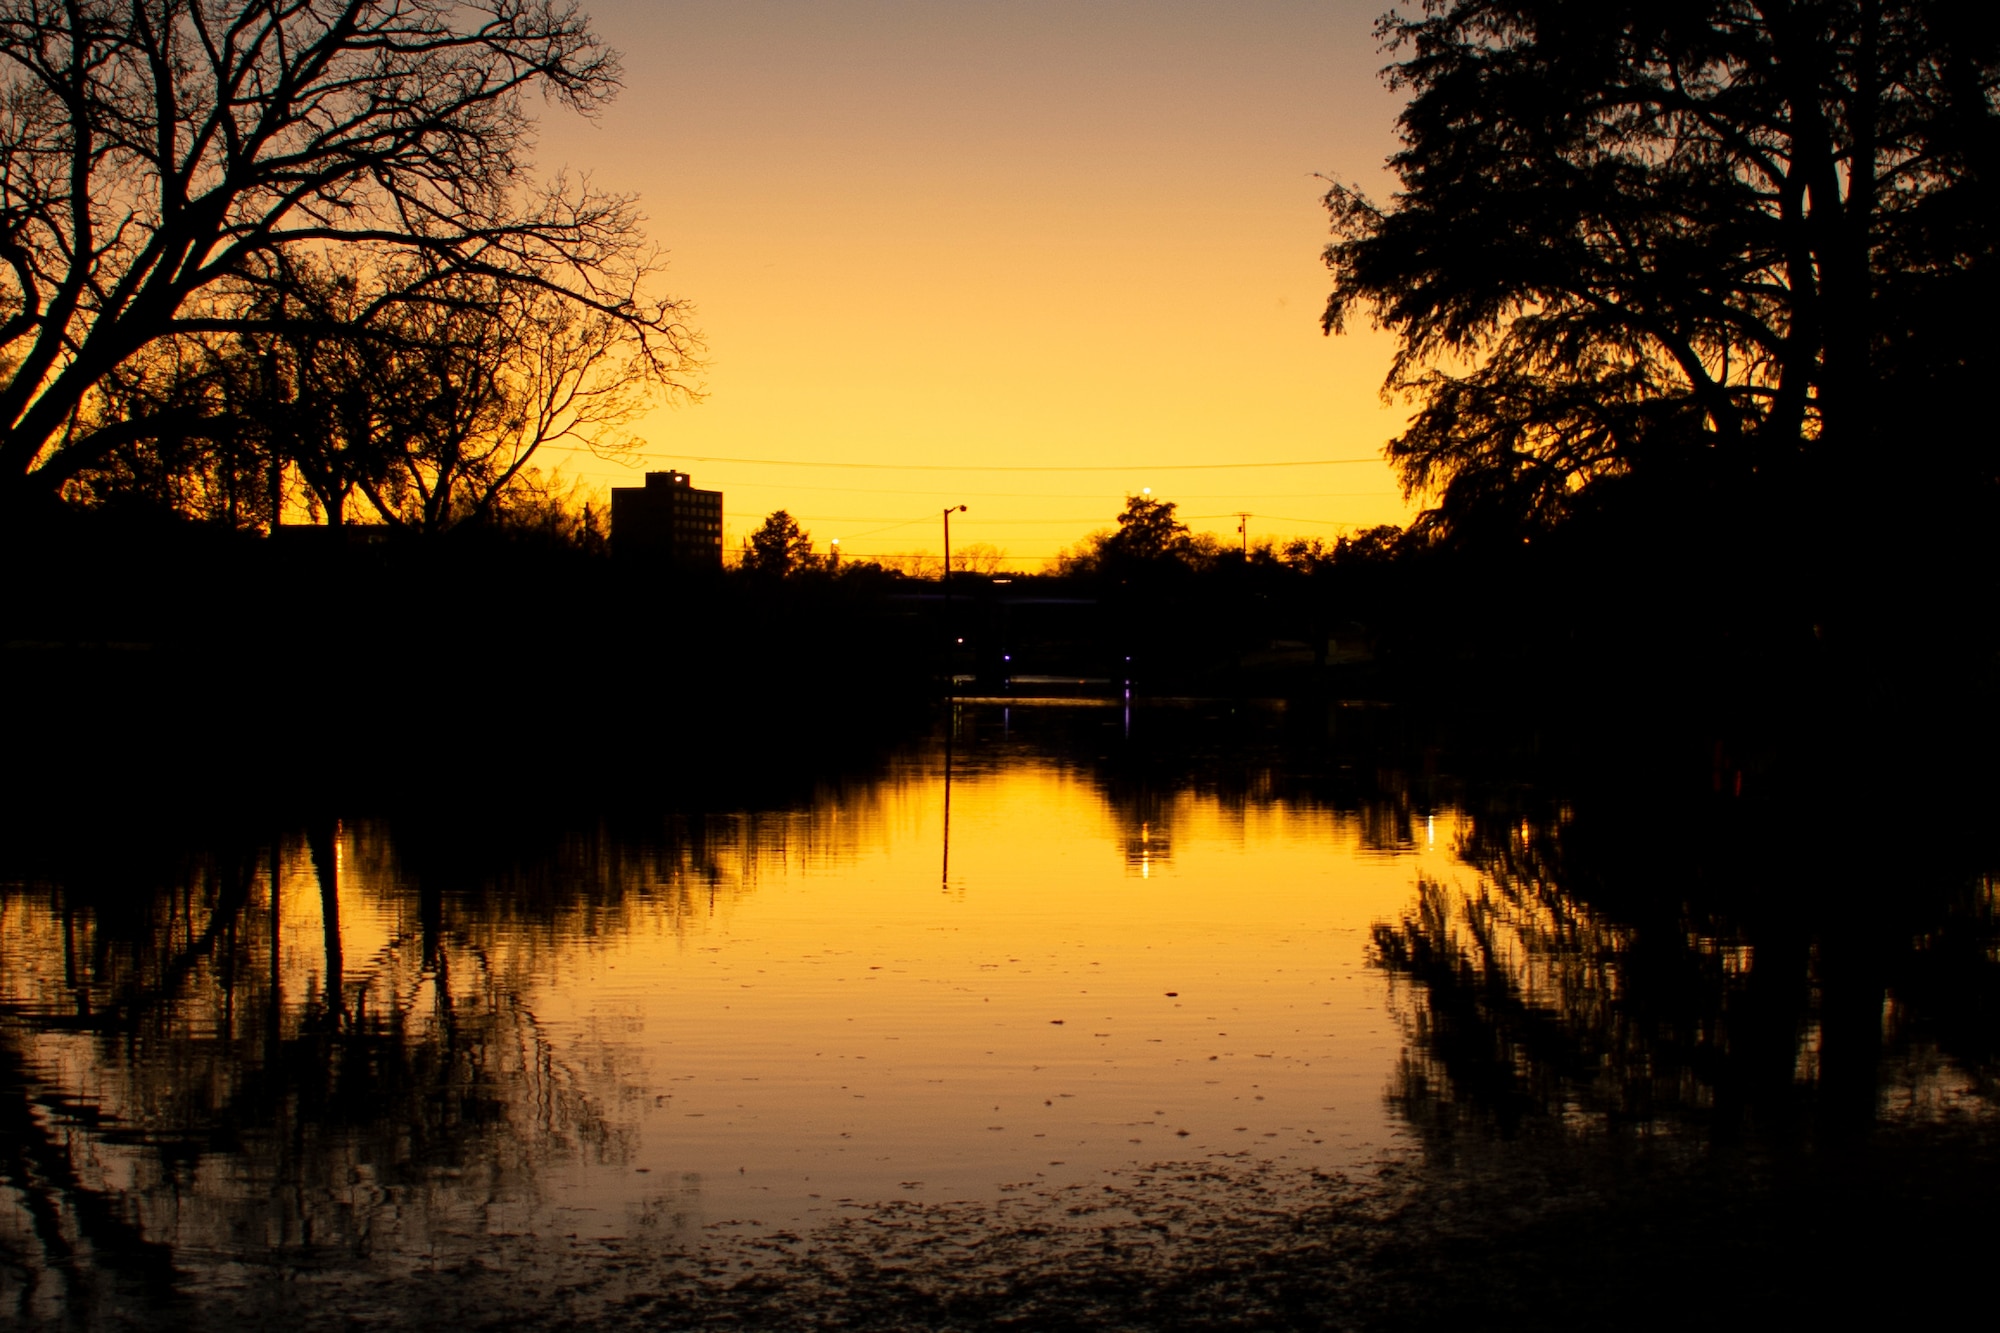 The sun sets over the Concho River in San Angelo, Texas, Nov. 28, 2018. The Mental Health Clinic mission is to provide the highest quality of care to the base population and the local community, across all branches of service, to promote mental health and provide appropriate support through prevention, education and treatment services. (U.S. Air Force photo by Senior Airman Randall Moose)